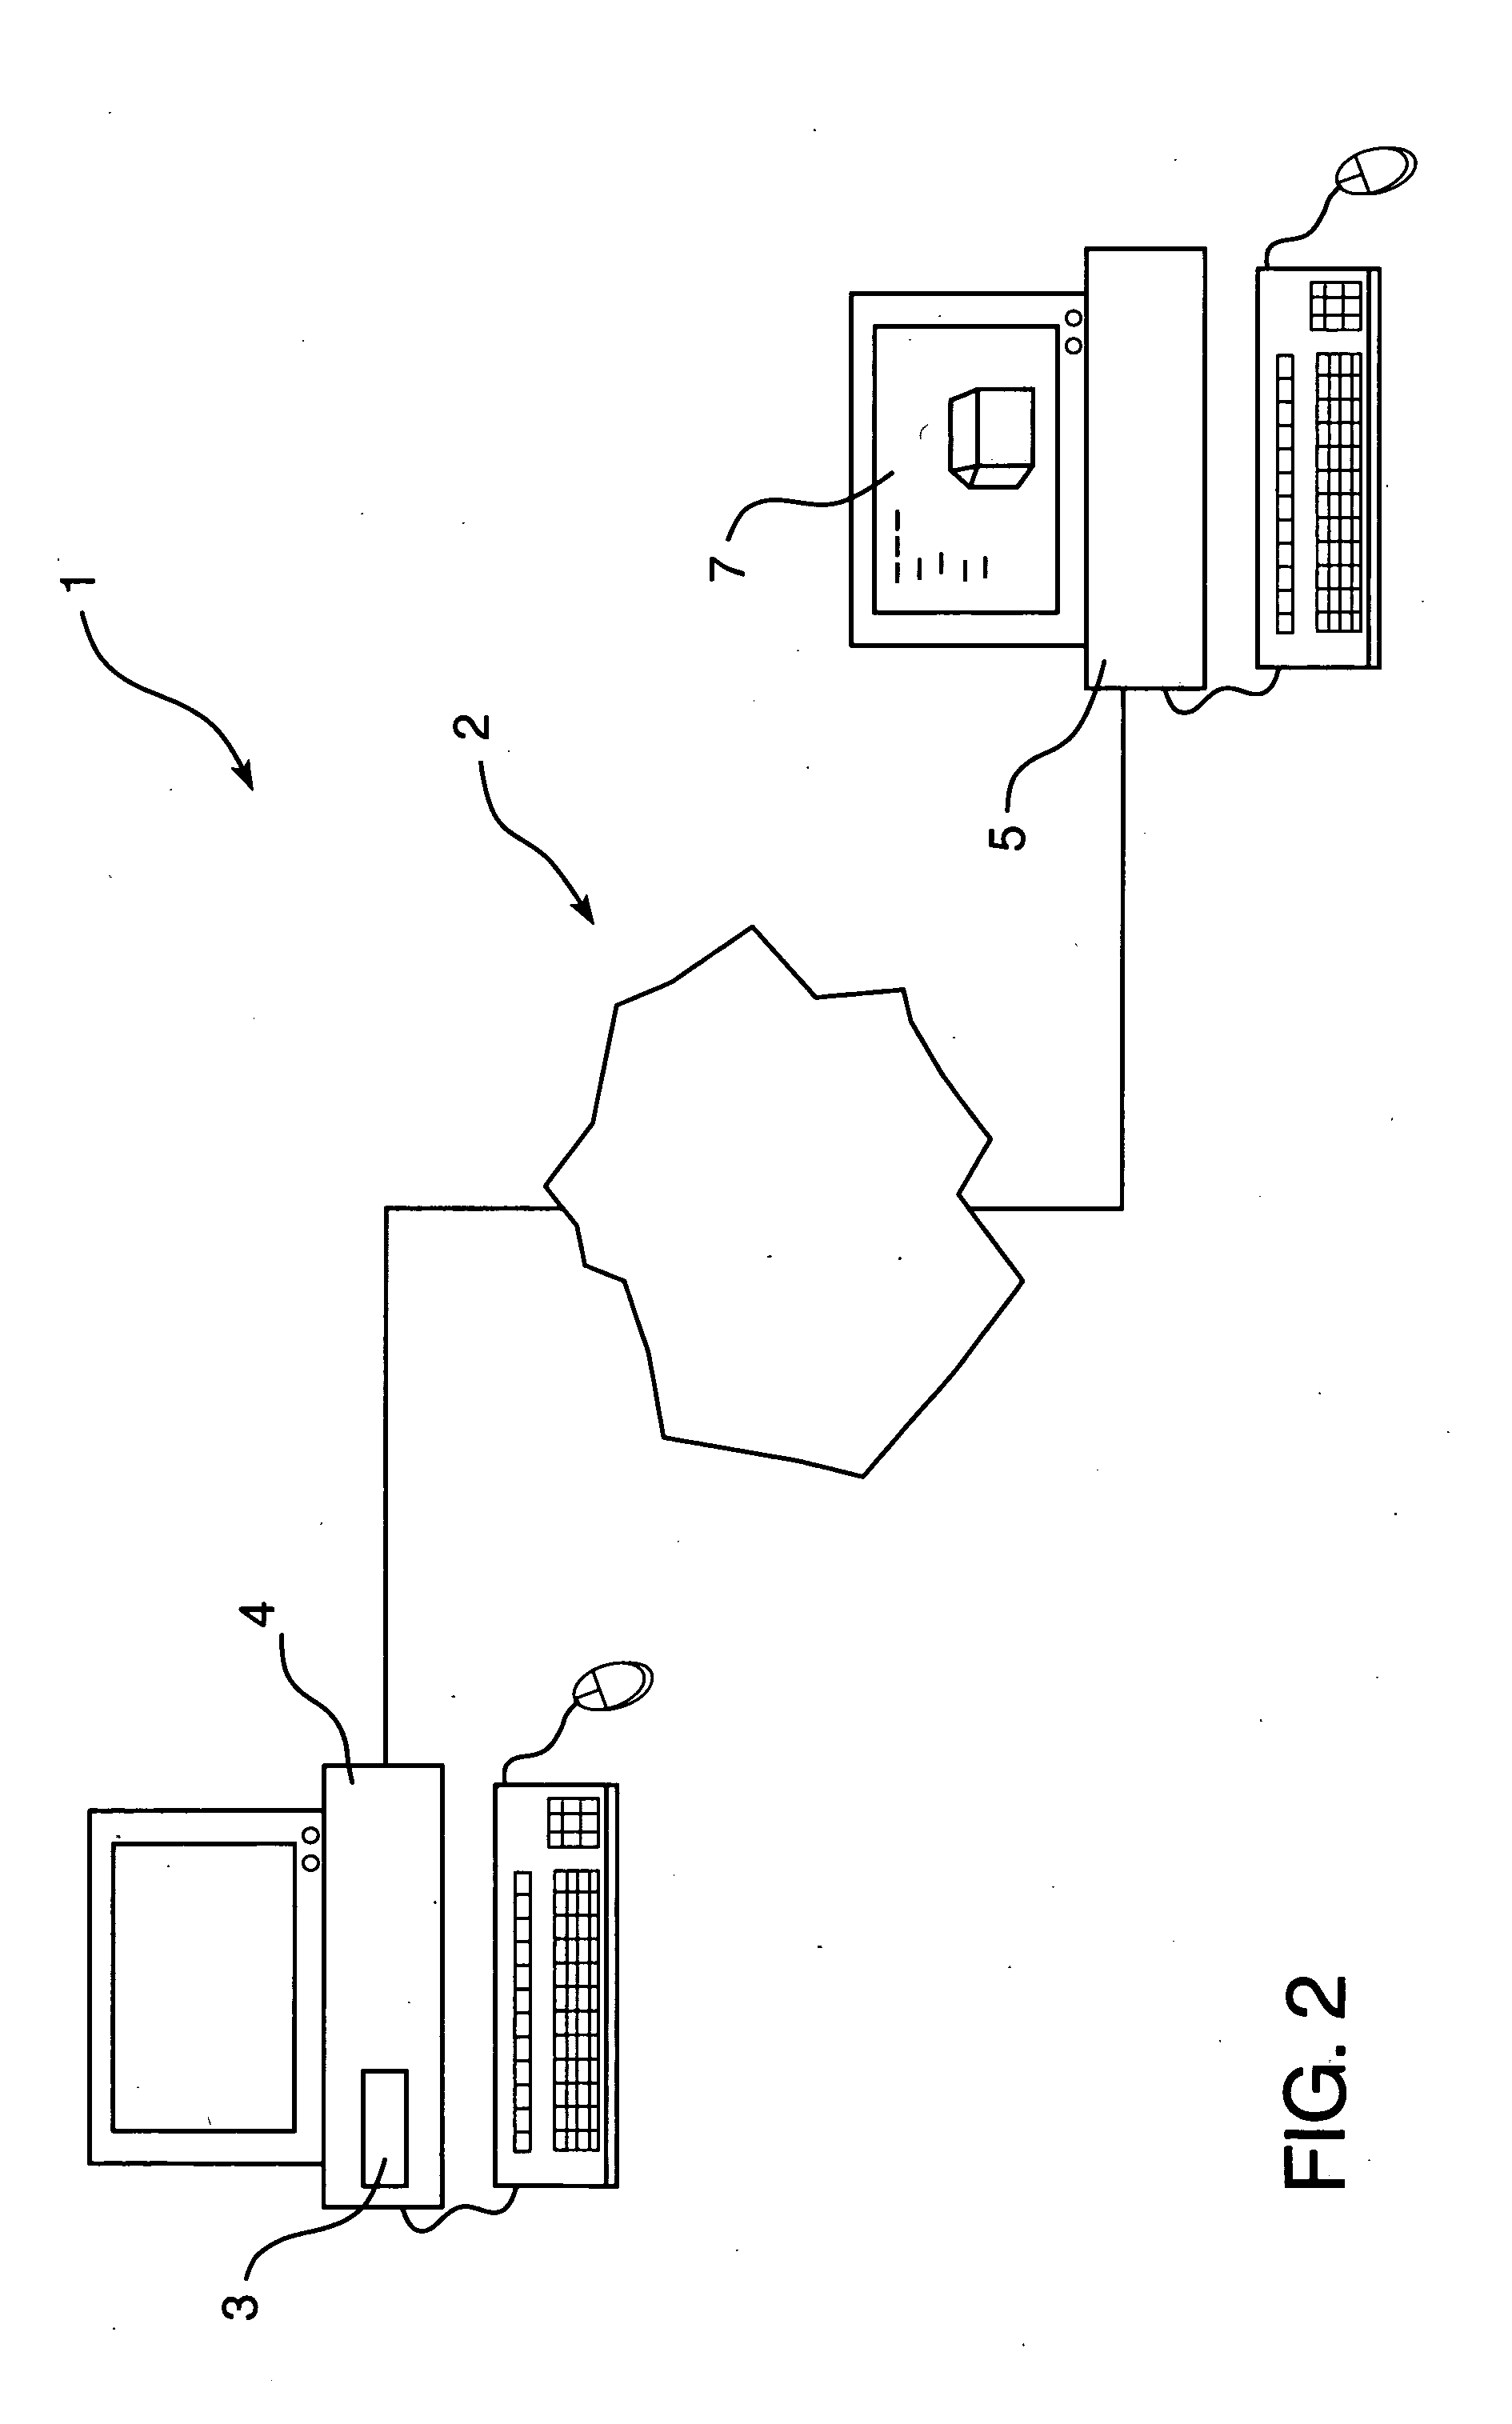 Method of selling pre-fabricated houses